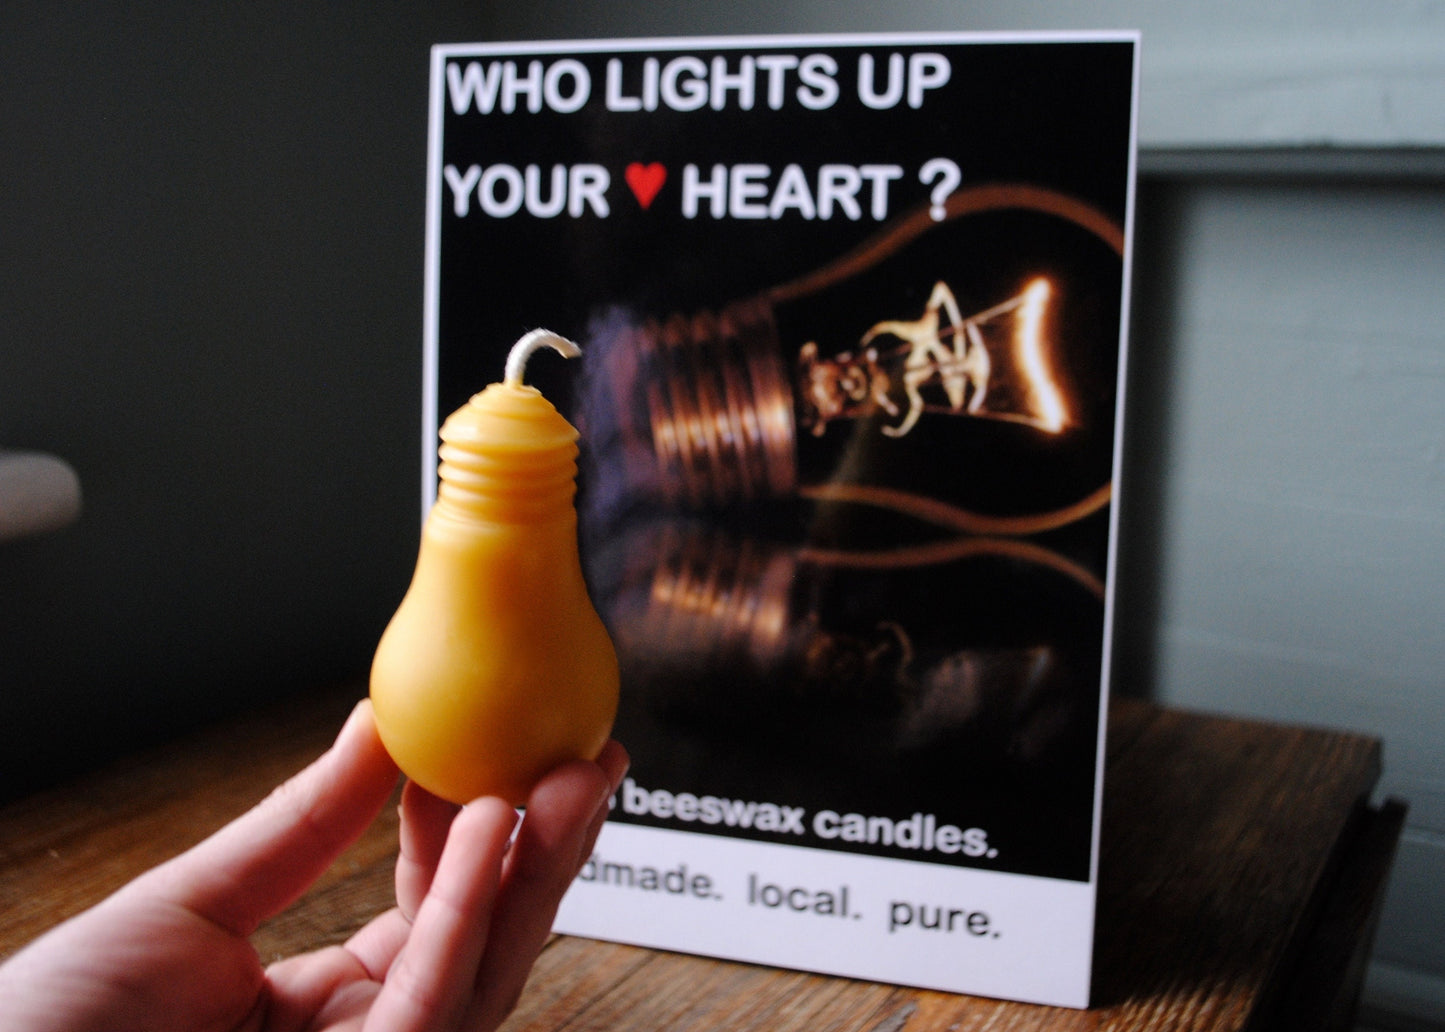 Lightbulb Beeswax Candle // Lightbulb, Votive Candle, Beeswax, Candle, Eco Friendly, Handcrafted